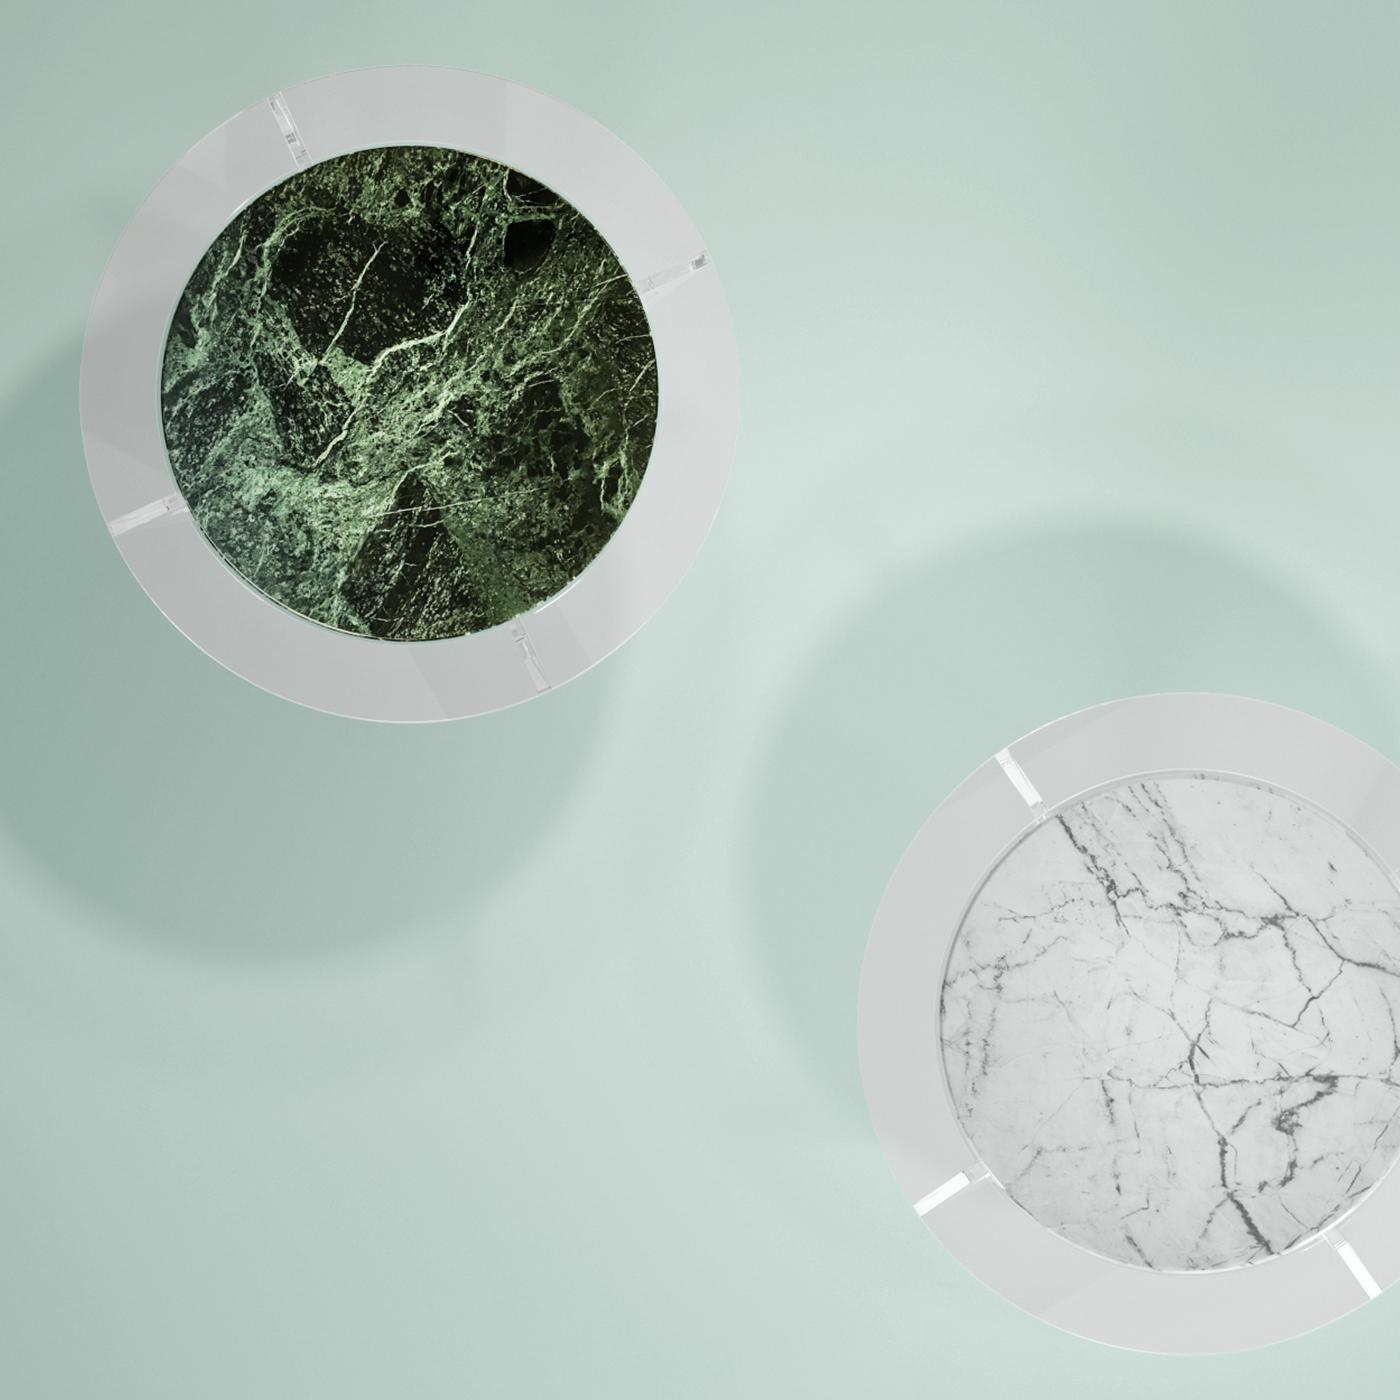 An exquisite Green Alps marble atop a crossed methacrylate base are the components of this original design that effortlessly merges solidity and transparency, modern and classic materials to become the eye-catching focal point in a modern living